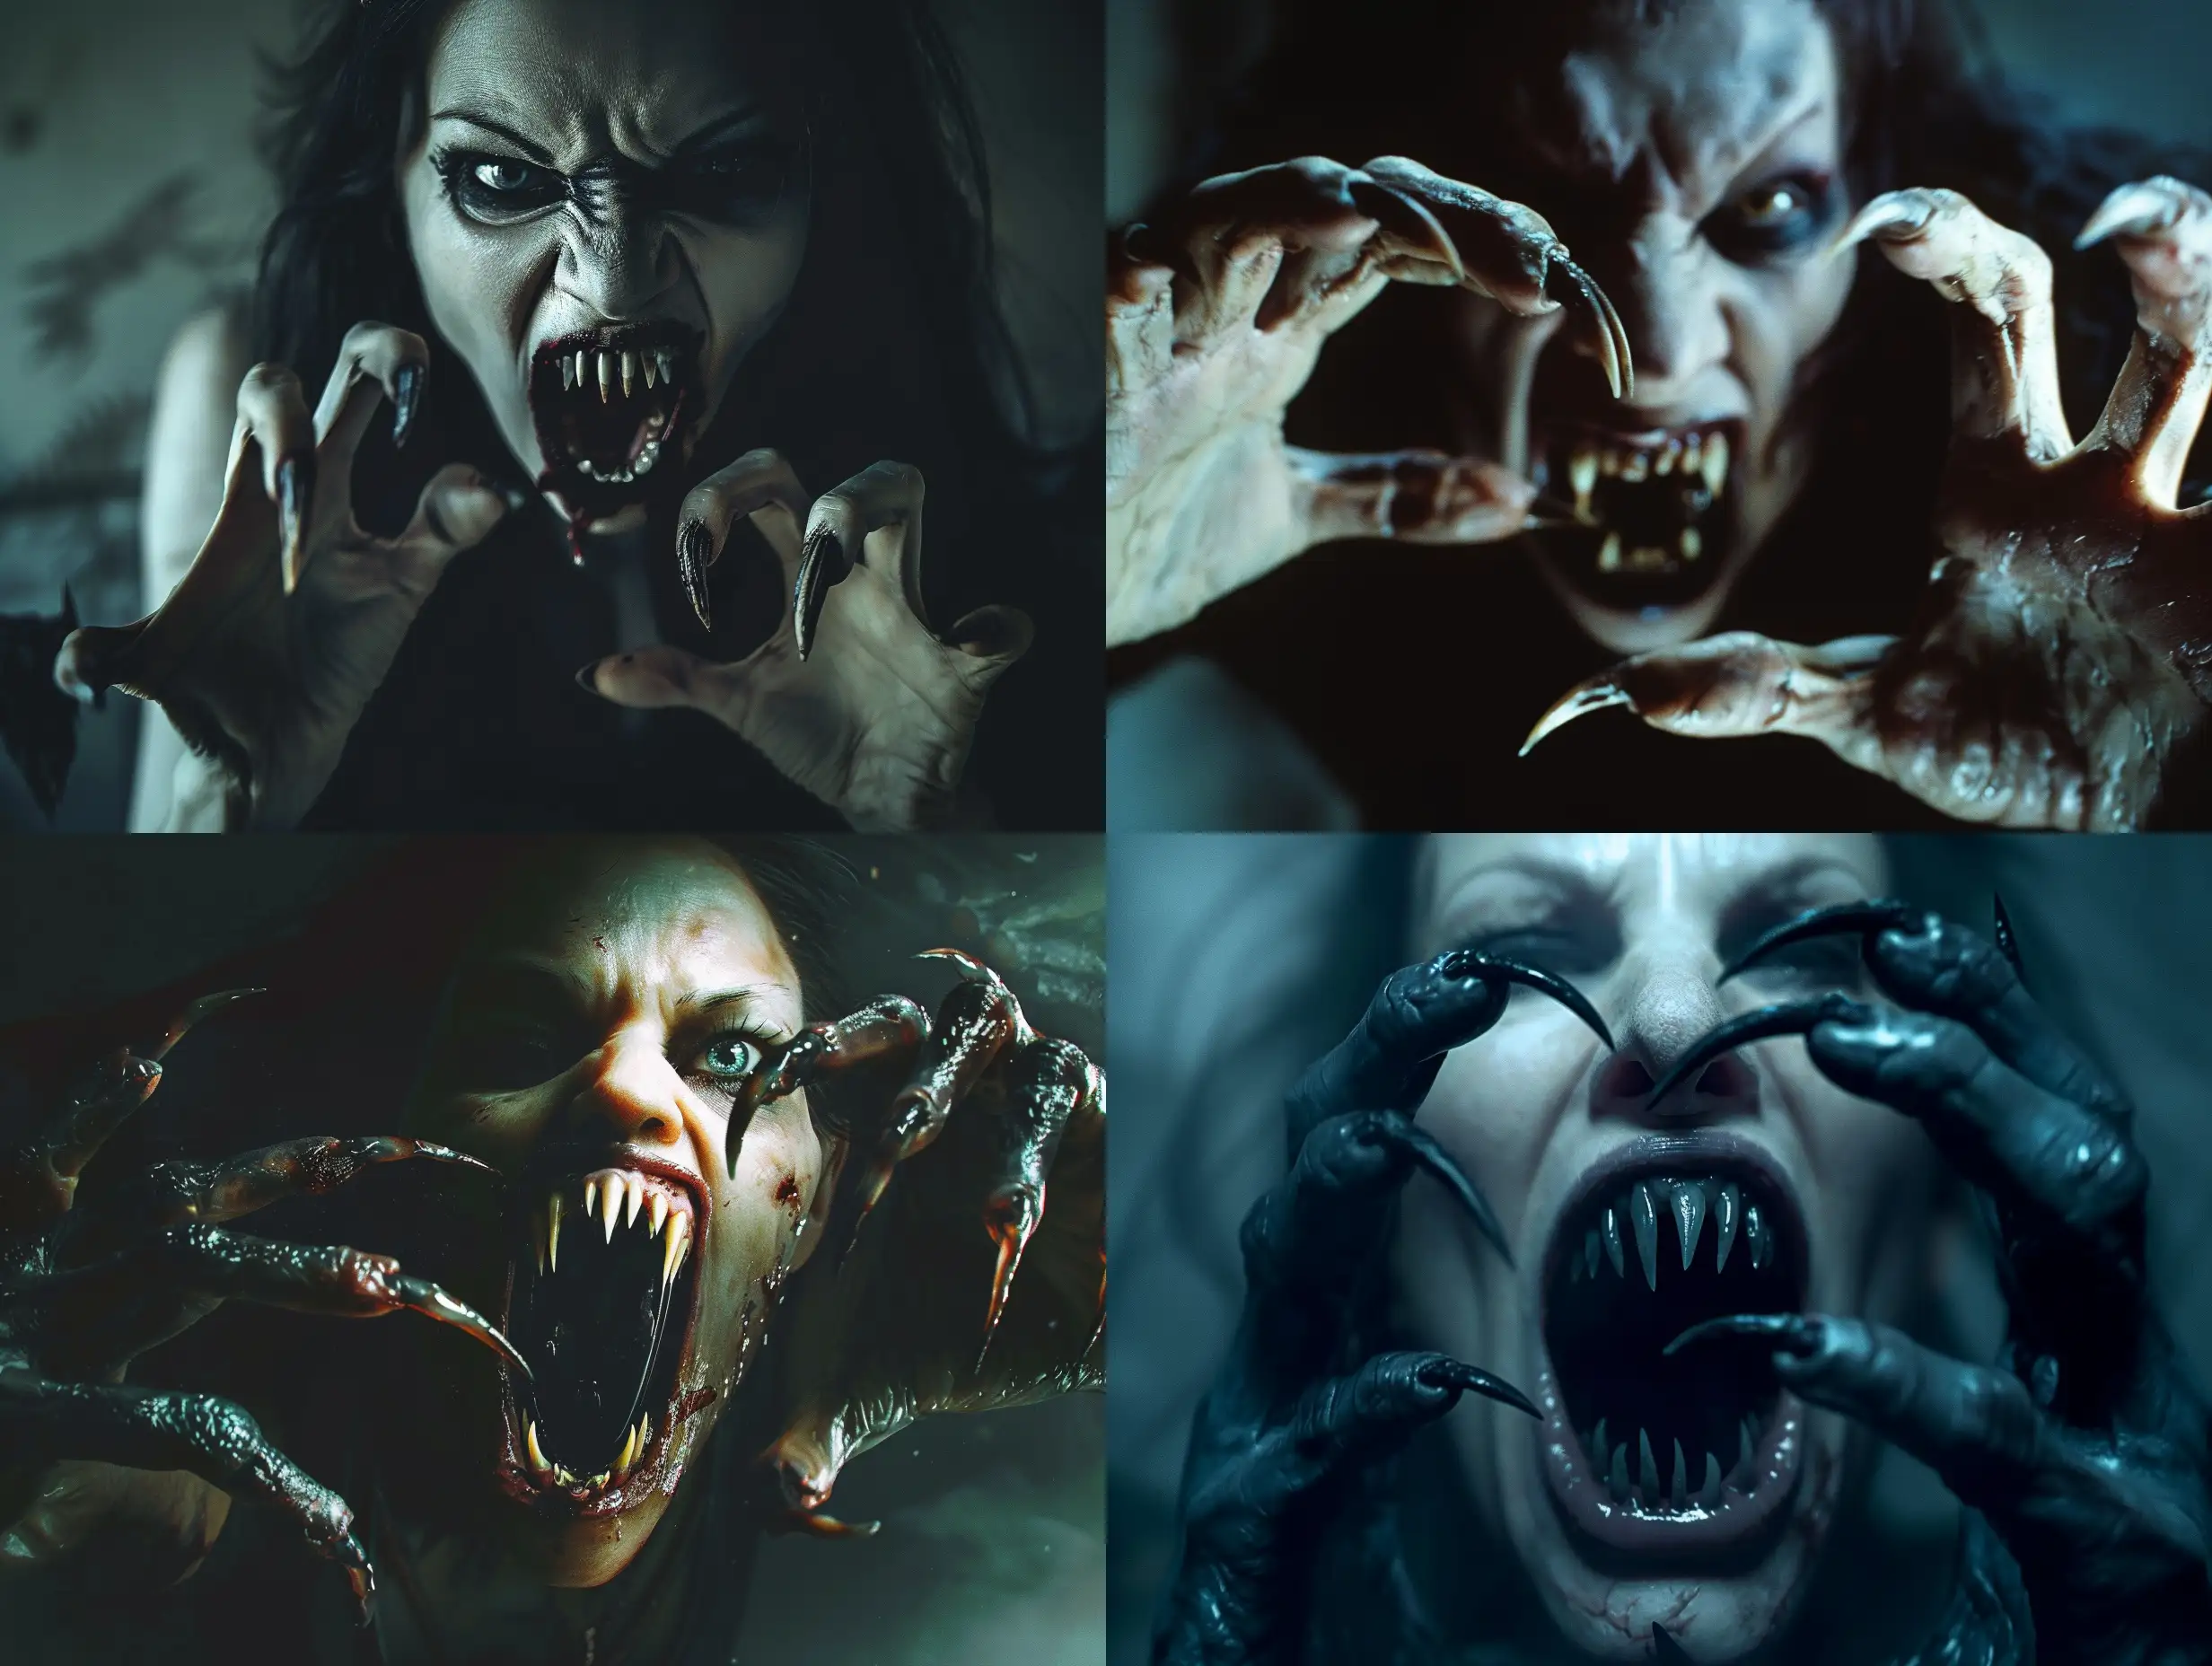 Sinister-Vampire-Woman-Emerges-from-Darkness-with-Fangs-and-Claws